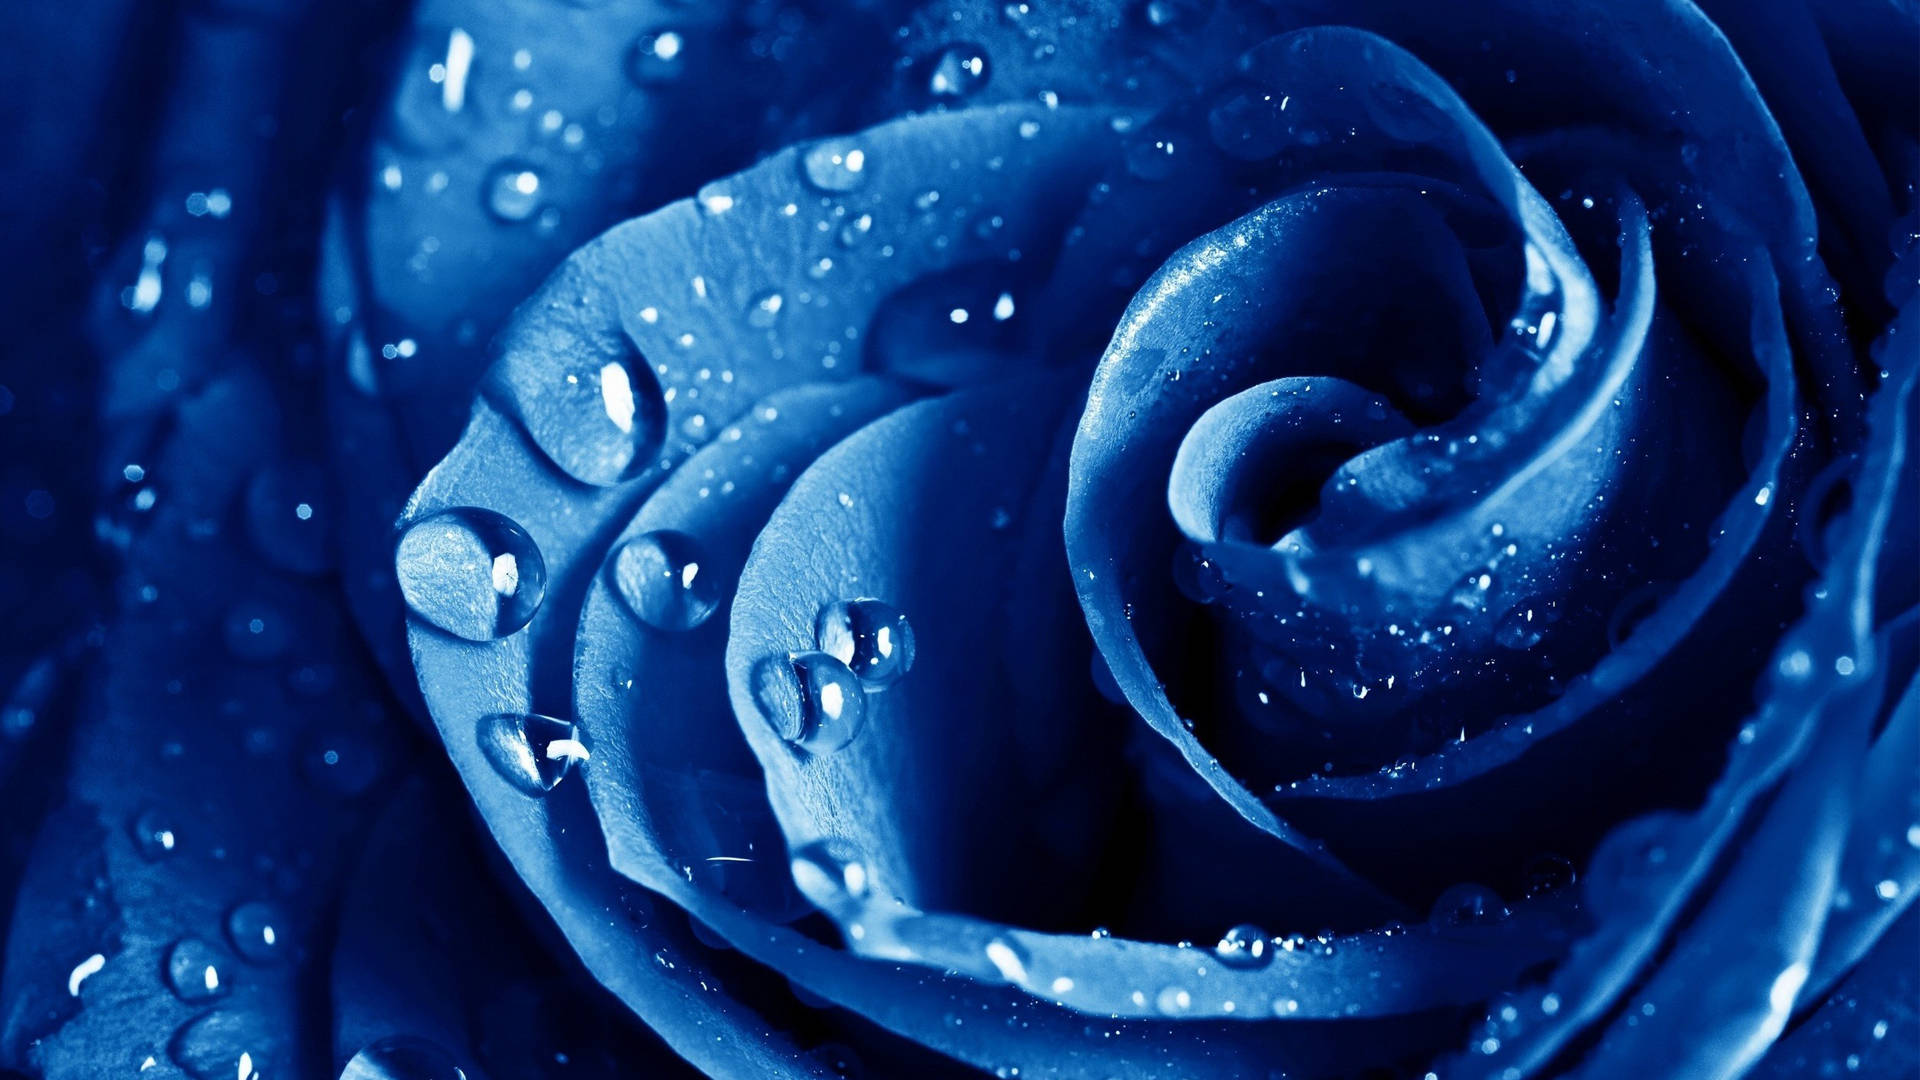 Neon Blue Aesthetic Rose Water Droplets